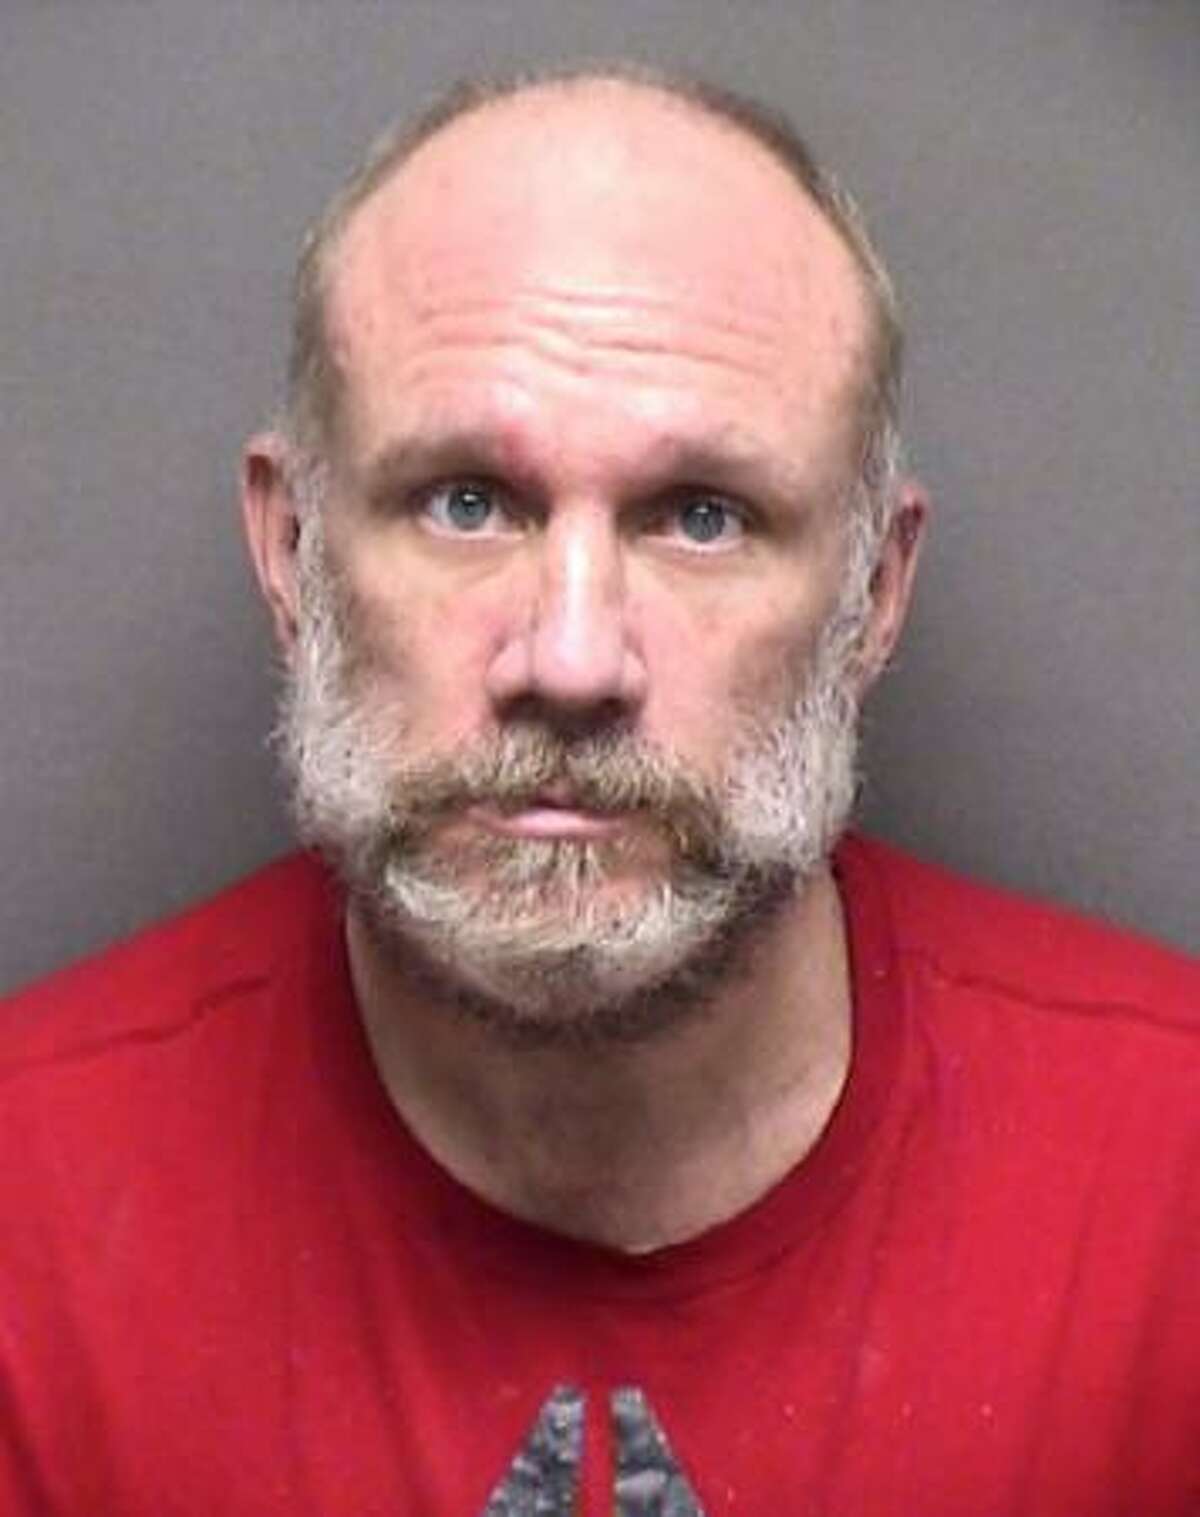 Dustin Cody McCall, 42, was charged with four counts of possession of child pornography and delivering drugs to a minor.